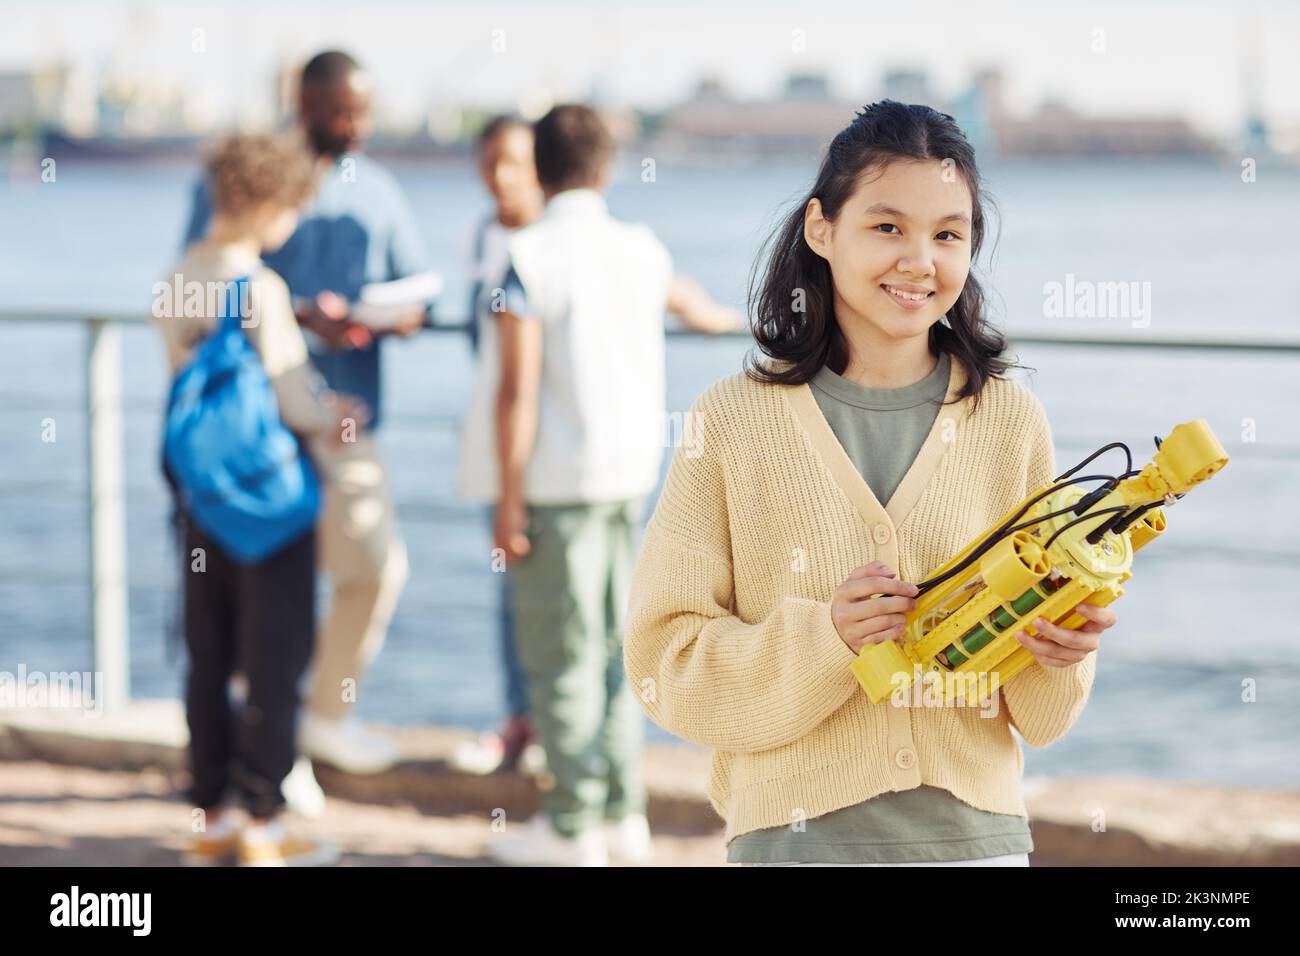 Waist up portrait of Asian teenage girl holding robot model and smiling at camera during outdoor engineering class with kids in background, copy space Stock Photo